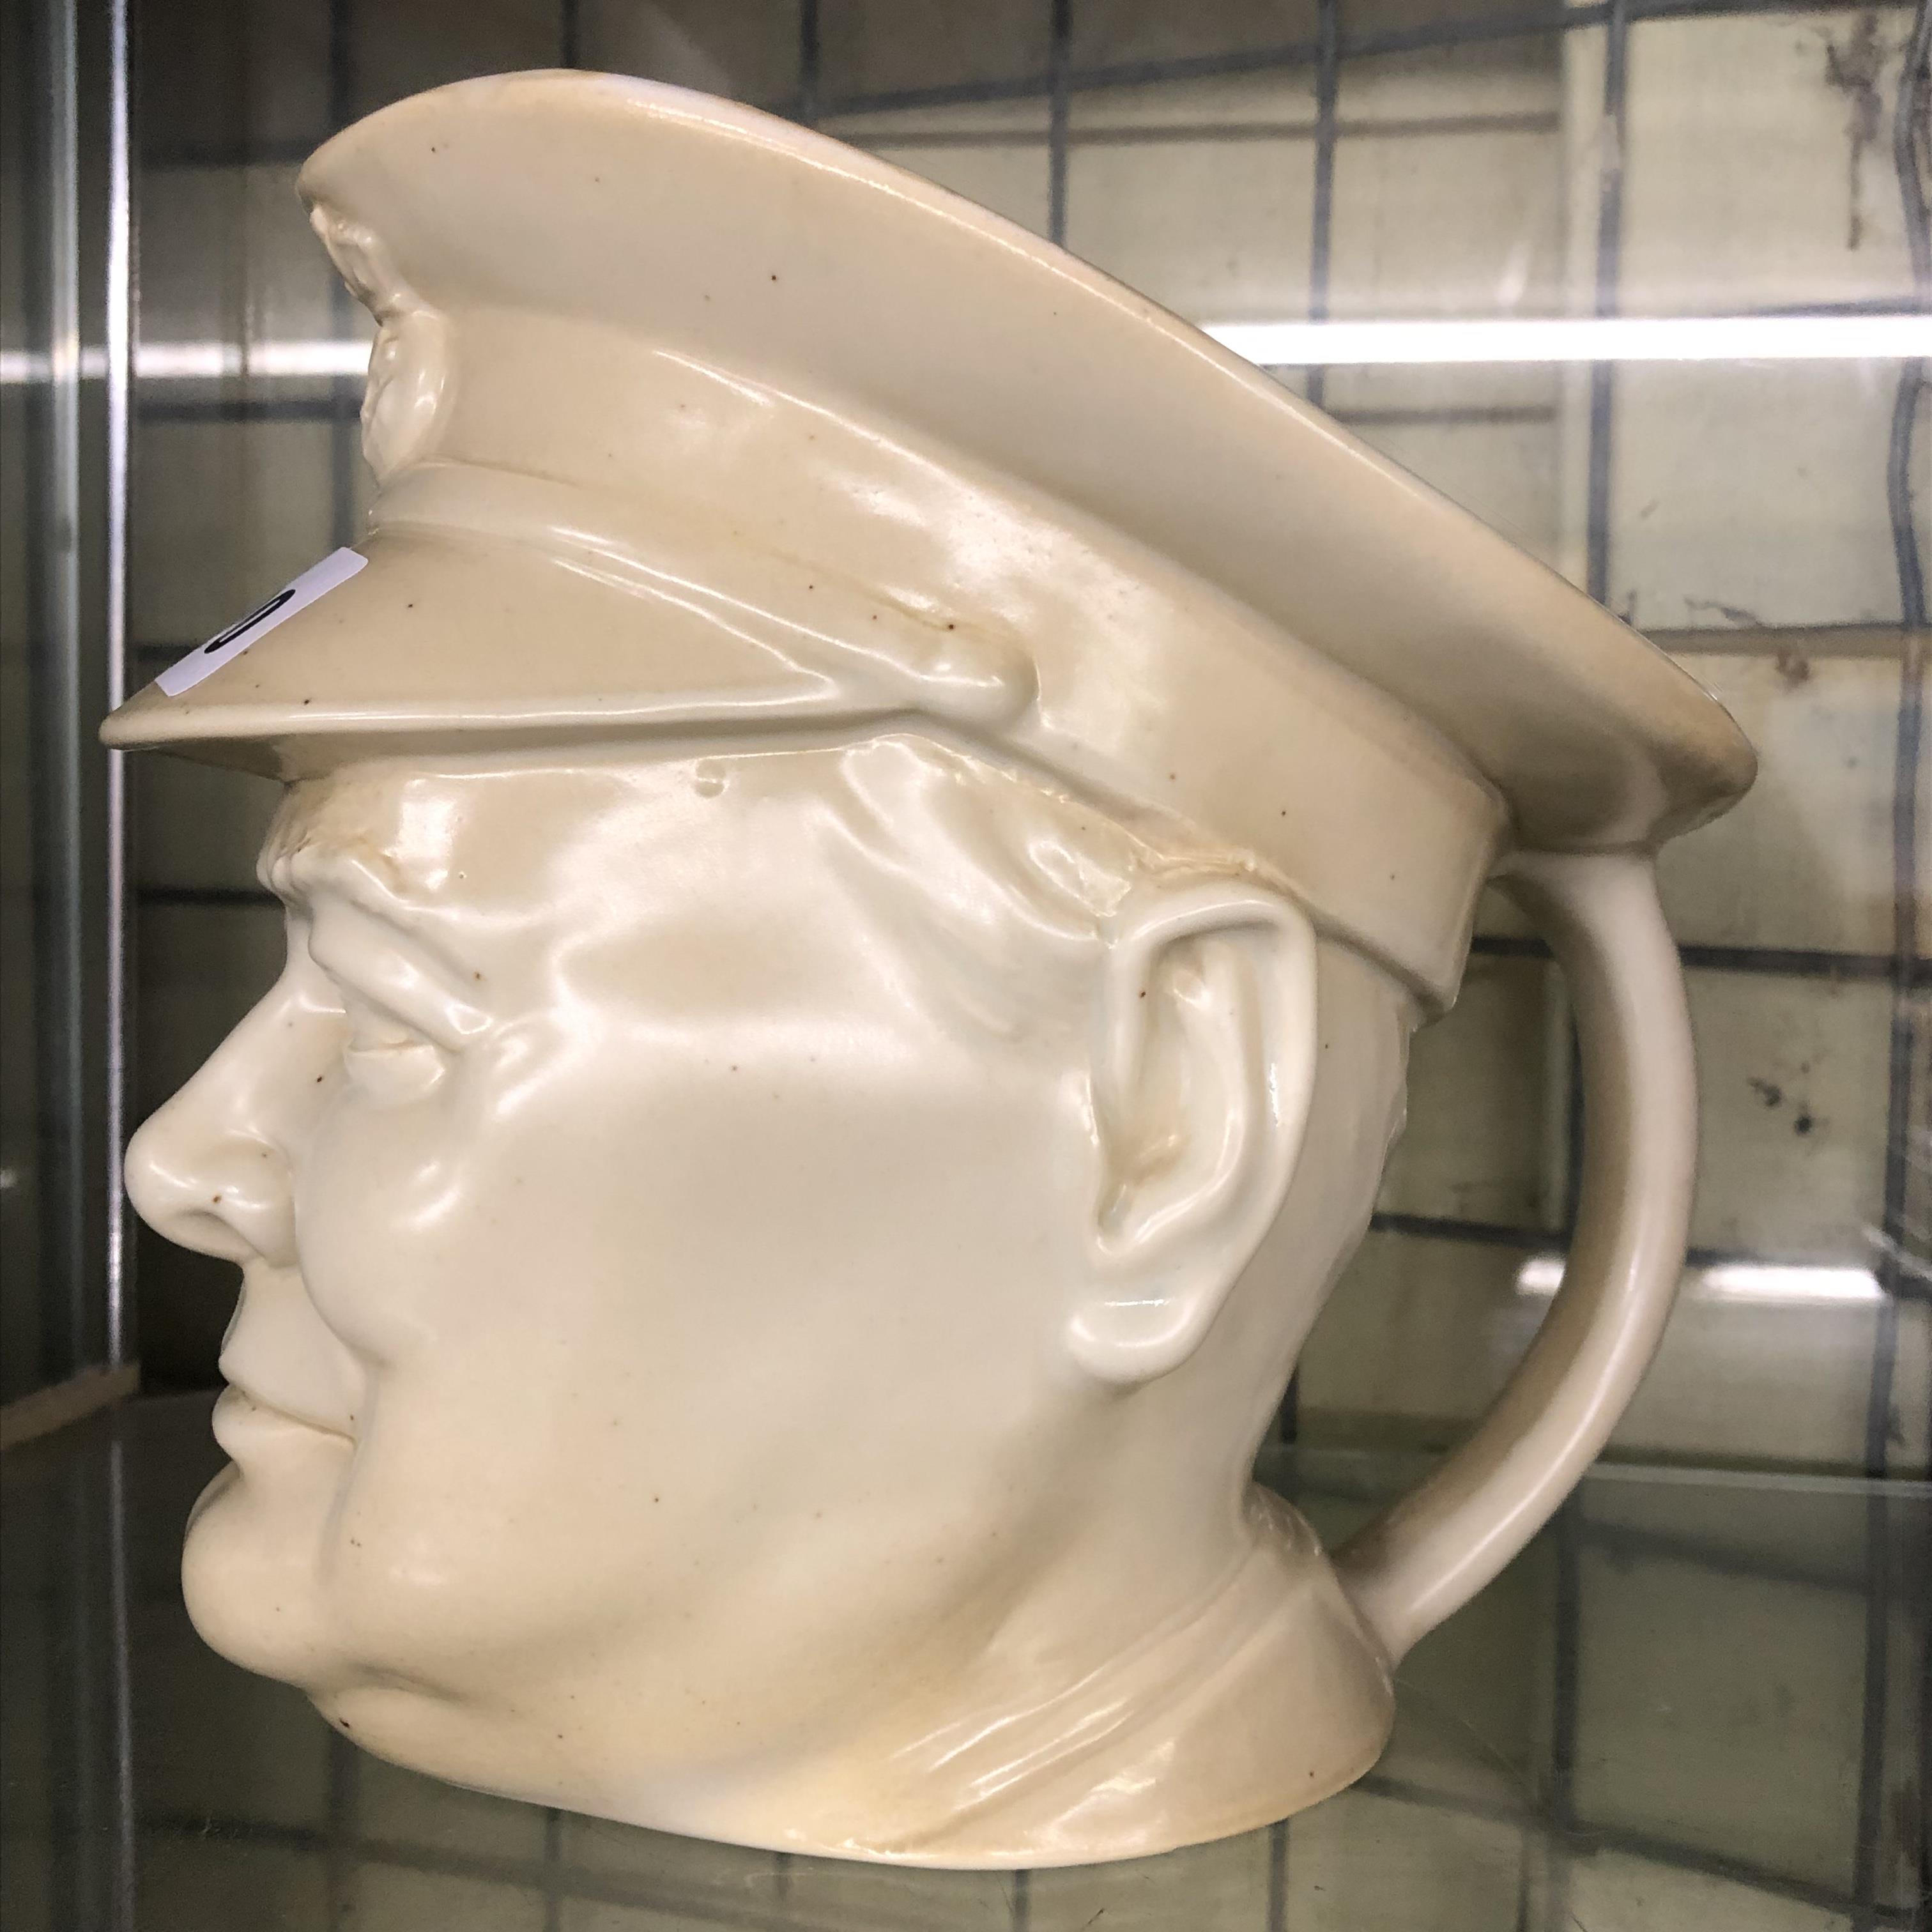 MINTON WINSTON CHURCHILL CHARACTER JUG MODELLED BY ERIC OWEN - Image 2 of 3